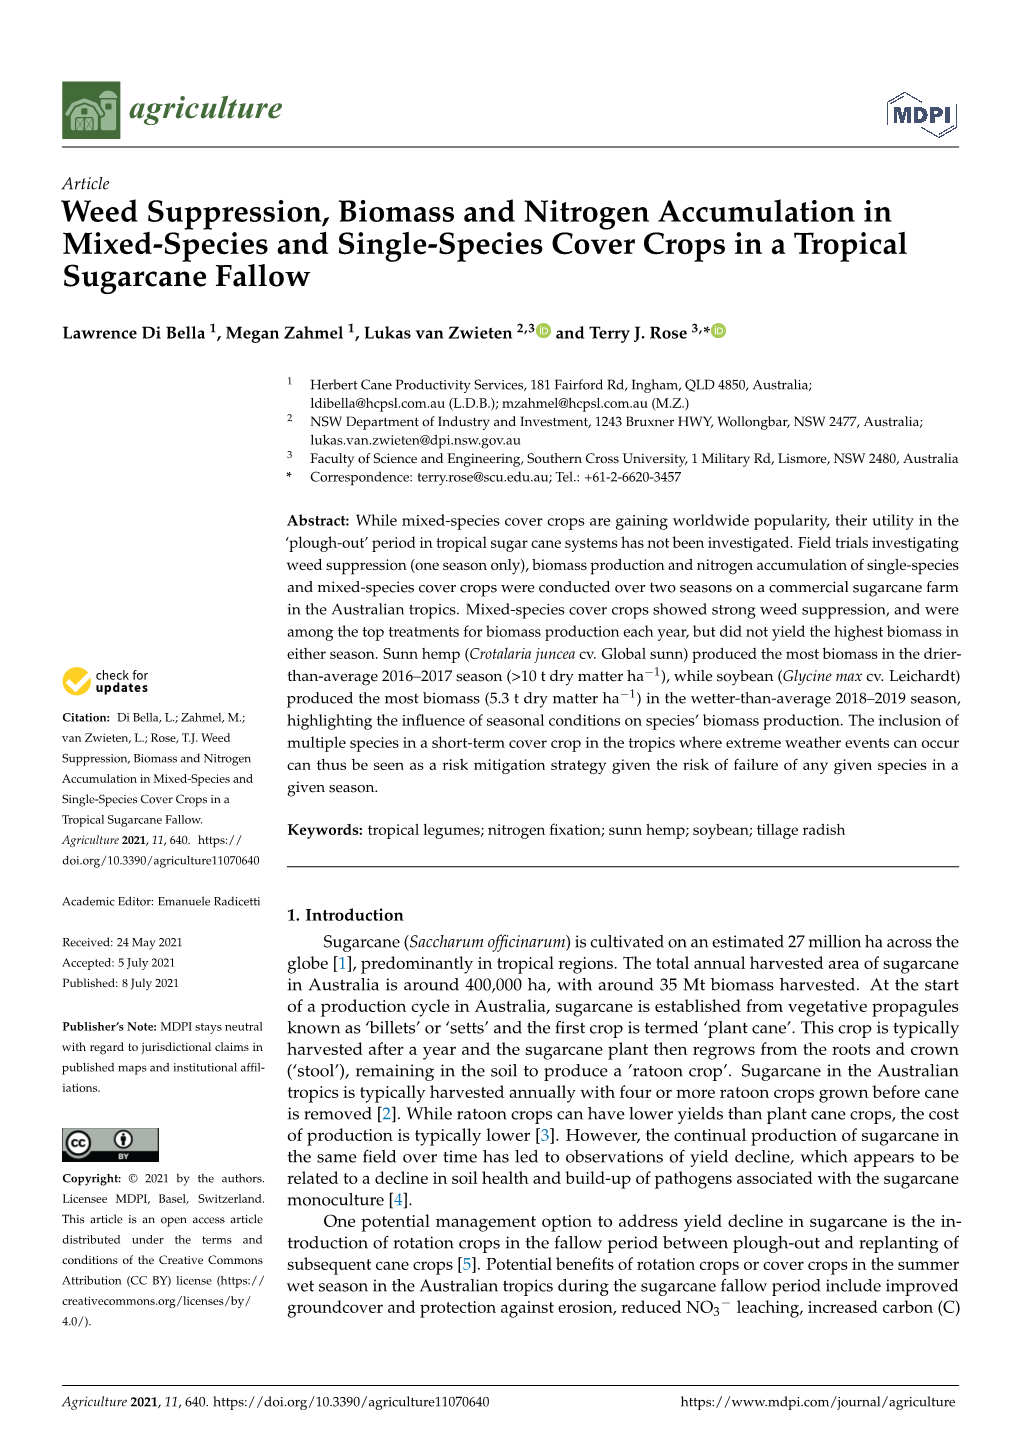 Weed Suppression, Biomass and Nitrogen Accumulation in Mixed-Species and Single-Species Cover Crops in a Tropical Sugarcane Fallow